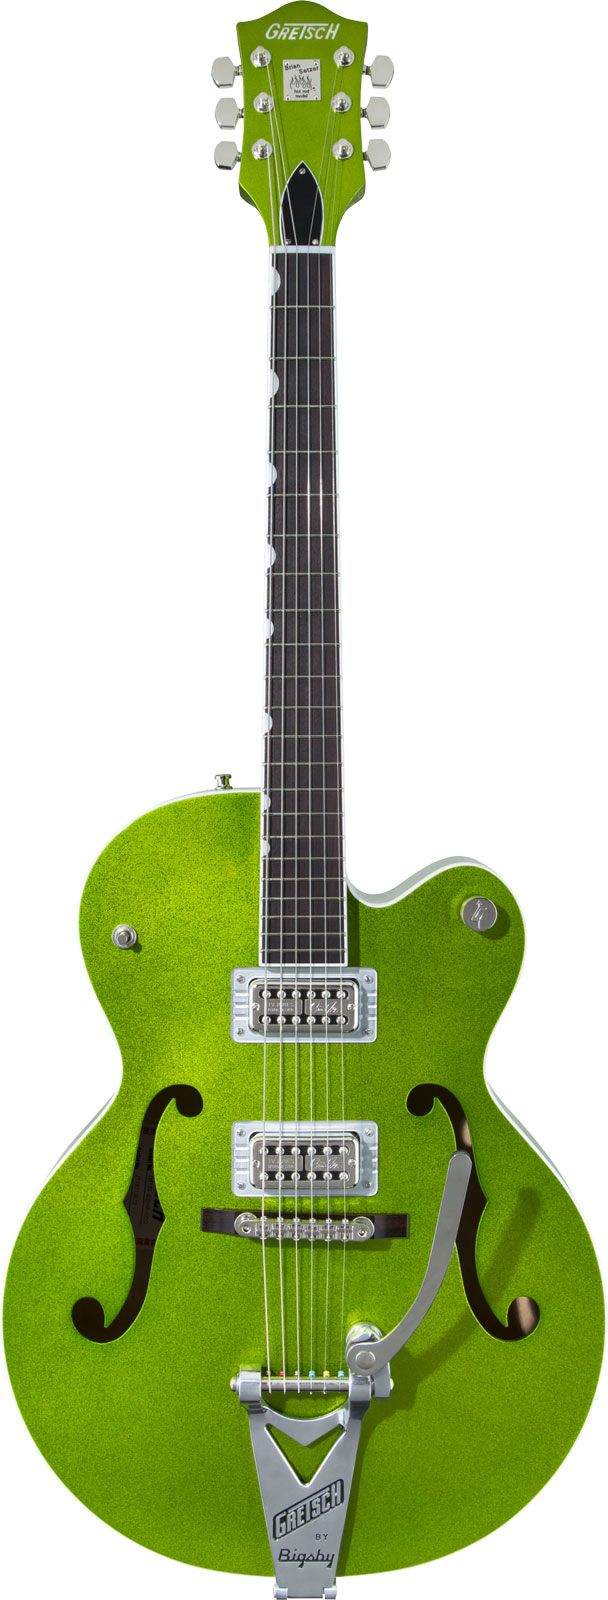 GRETSCH GUITARS G6120T-HR BRIAN SETZER SIGNATURE HOT ROD HOLLOW BODY WITH BIGSBY RW, EXTREME COOLANT GREEN SPARKLE